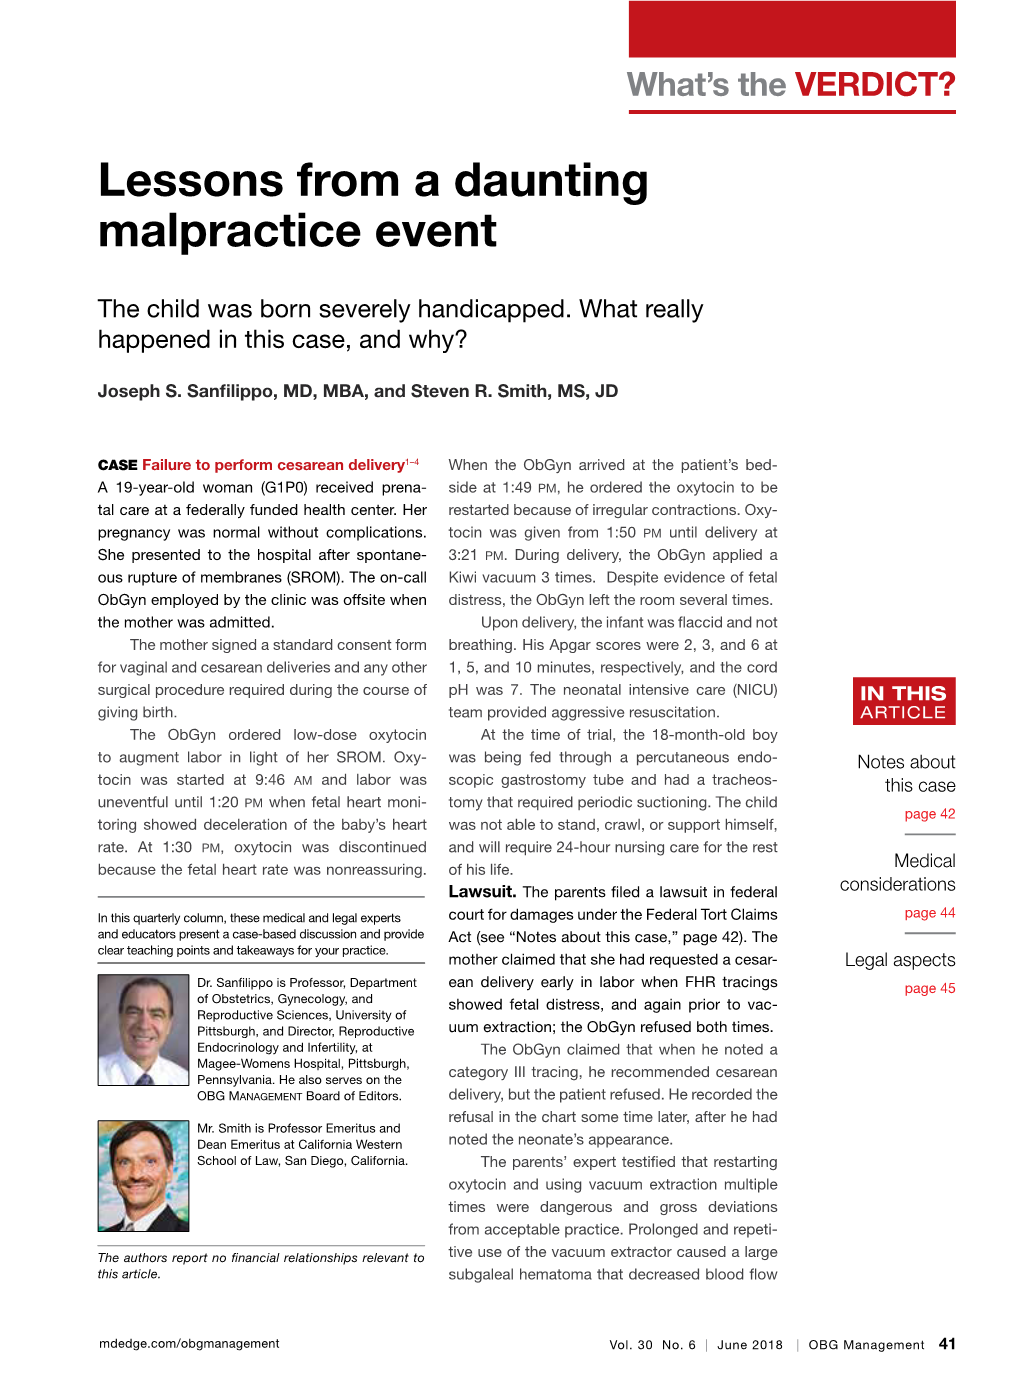 Lessons from a Daunting Malpractice Event